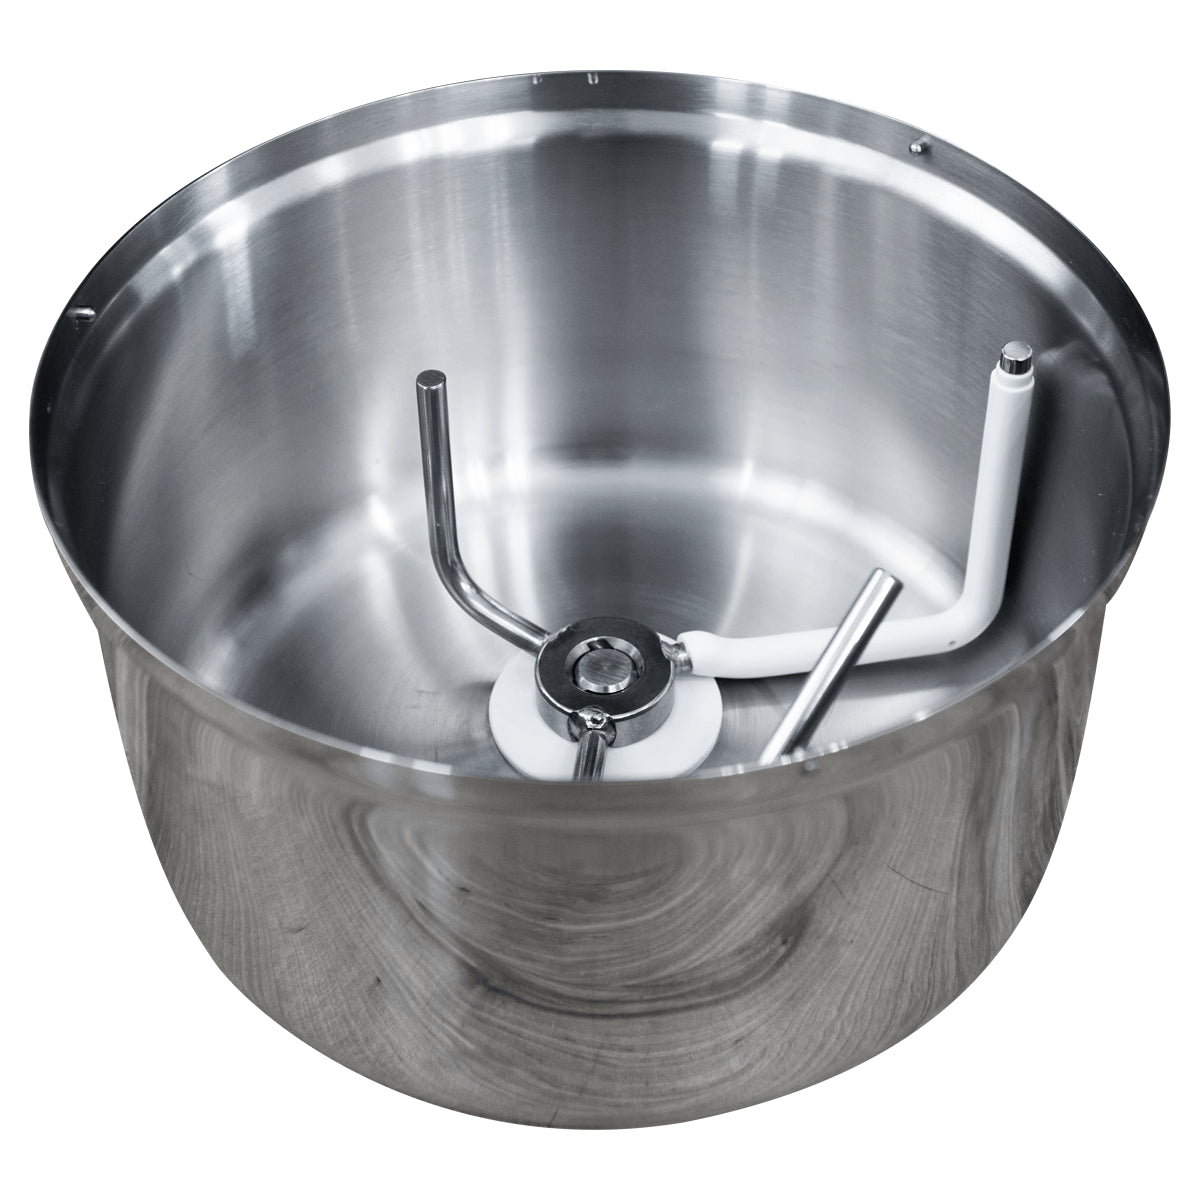 Stainless Steel Bottom Drive Bowl